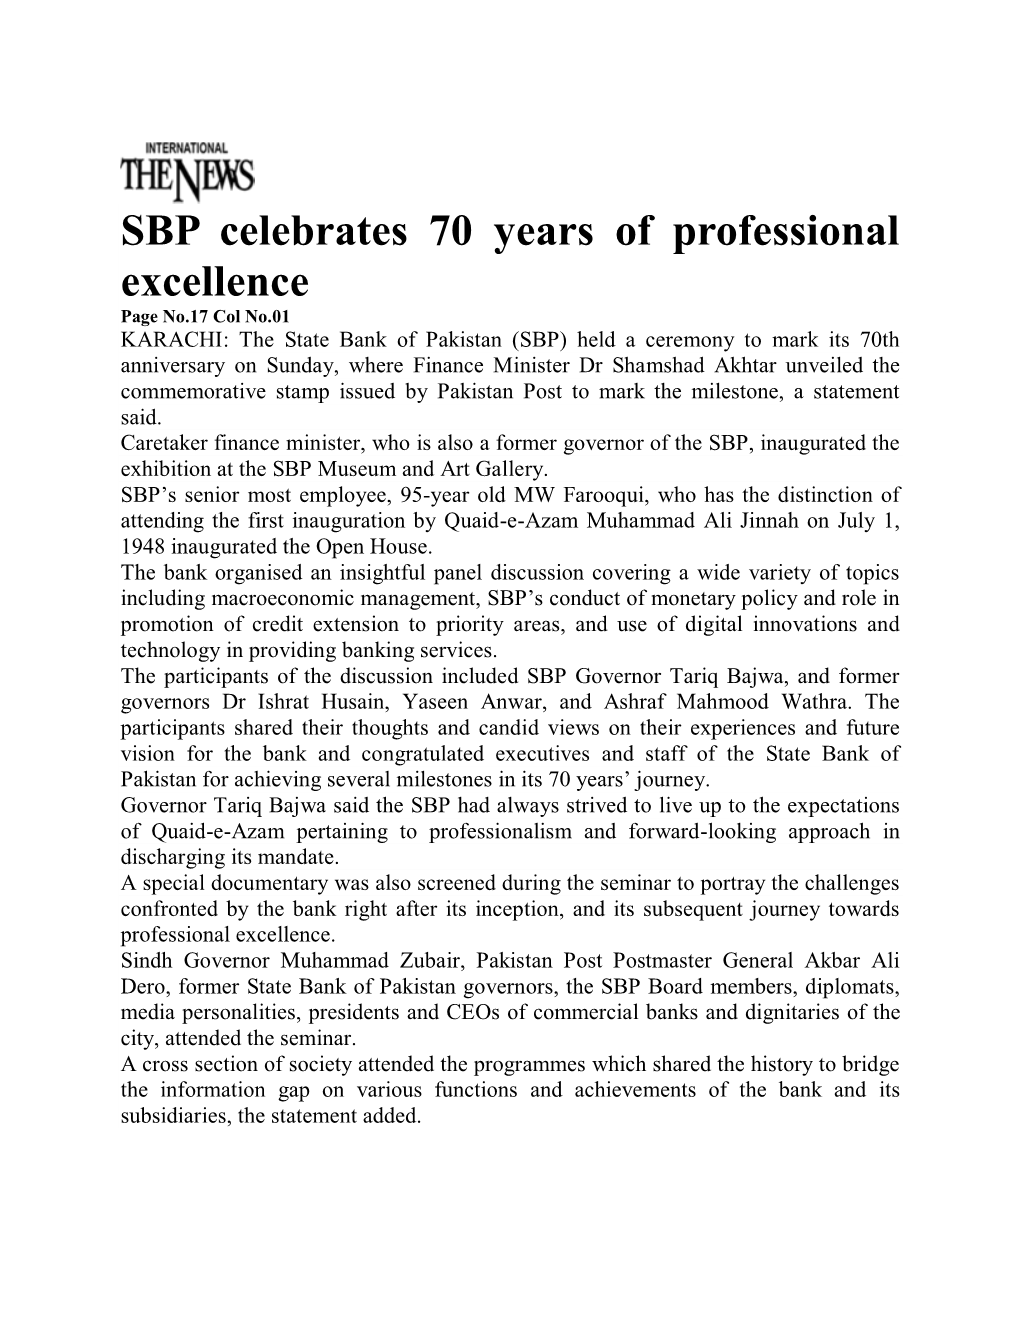 SBP Celebrates 70 Years of Professional Excellence